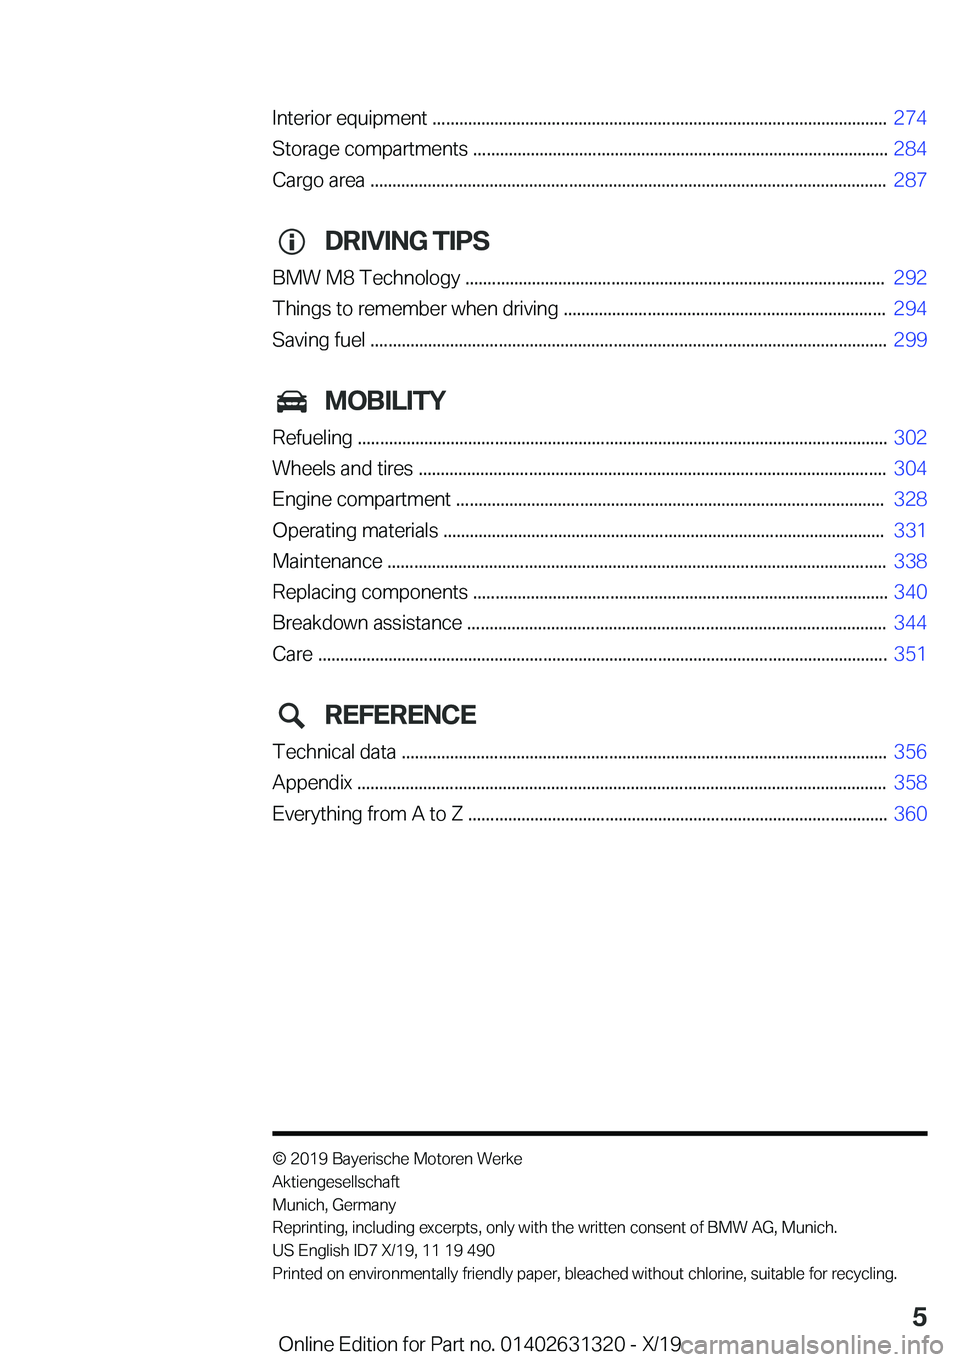 BMW M8 COUPE 2020  Owners Manual �I�n�t�e�r�i�o�r��e�q�u�i�p�m�e�n�t��.�.�.�.�.�.�.�.�.�.�.�.�.�.�.�.�.�.�.�.�.�.�.�.�.�.�.�.�.�.�.�.�.�.�.�.�.�.�.�.�.�.�.�.�.�.�.�.�.�.�.�.�.�.�.�.�.�.�.�.�.�.�.�.�.�.�.�.�.�.�.�.�.�.�.�.�.�.�.�.�.